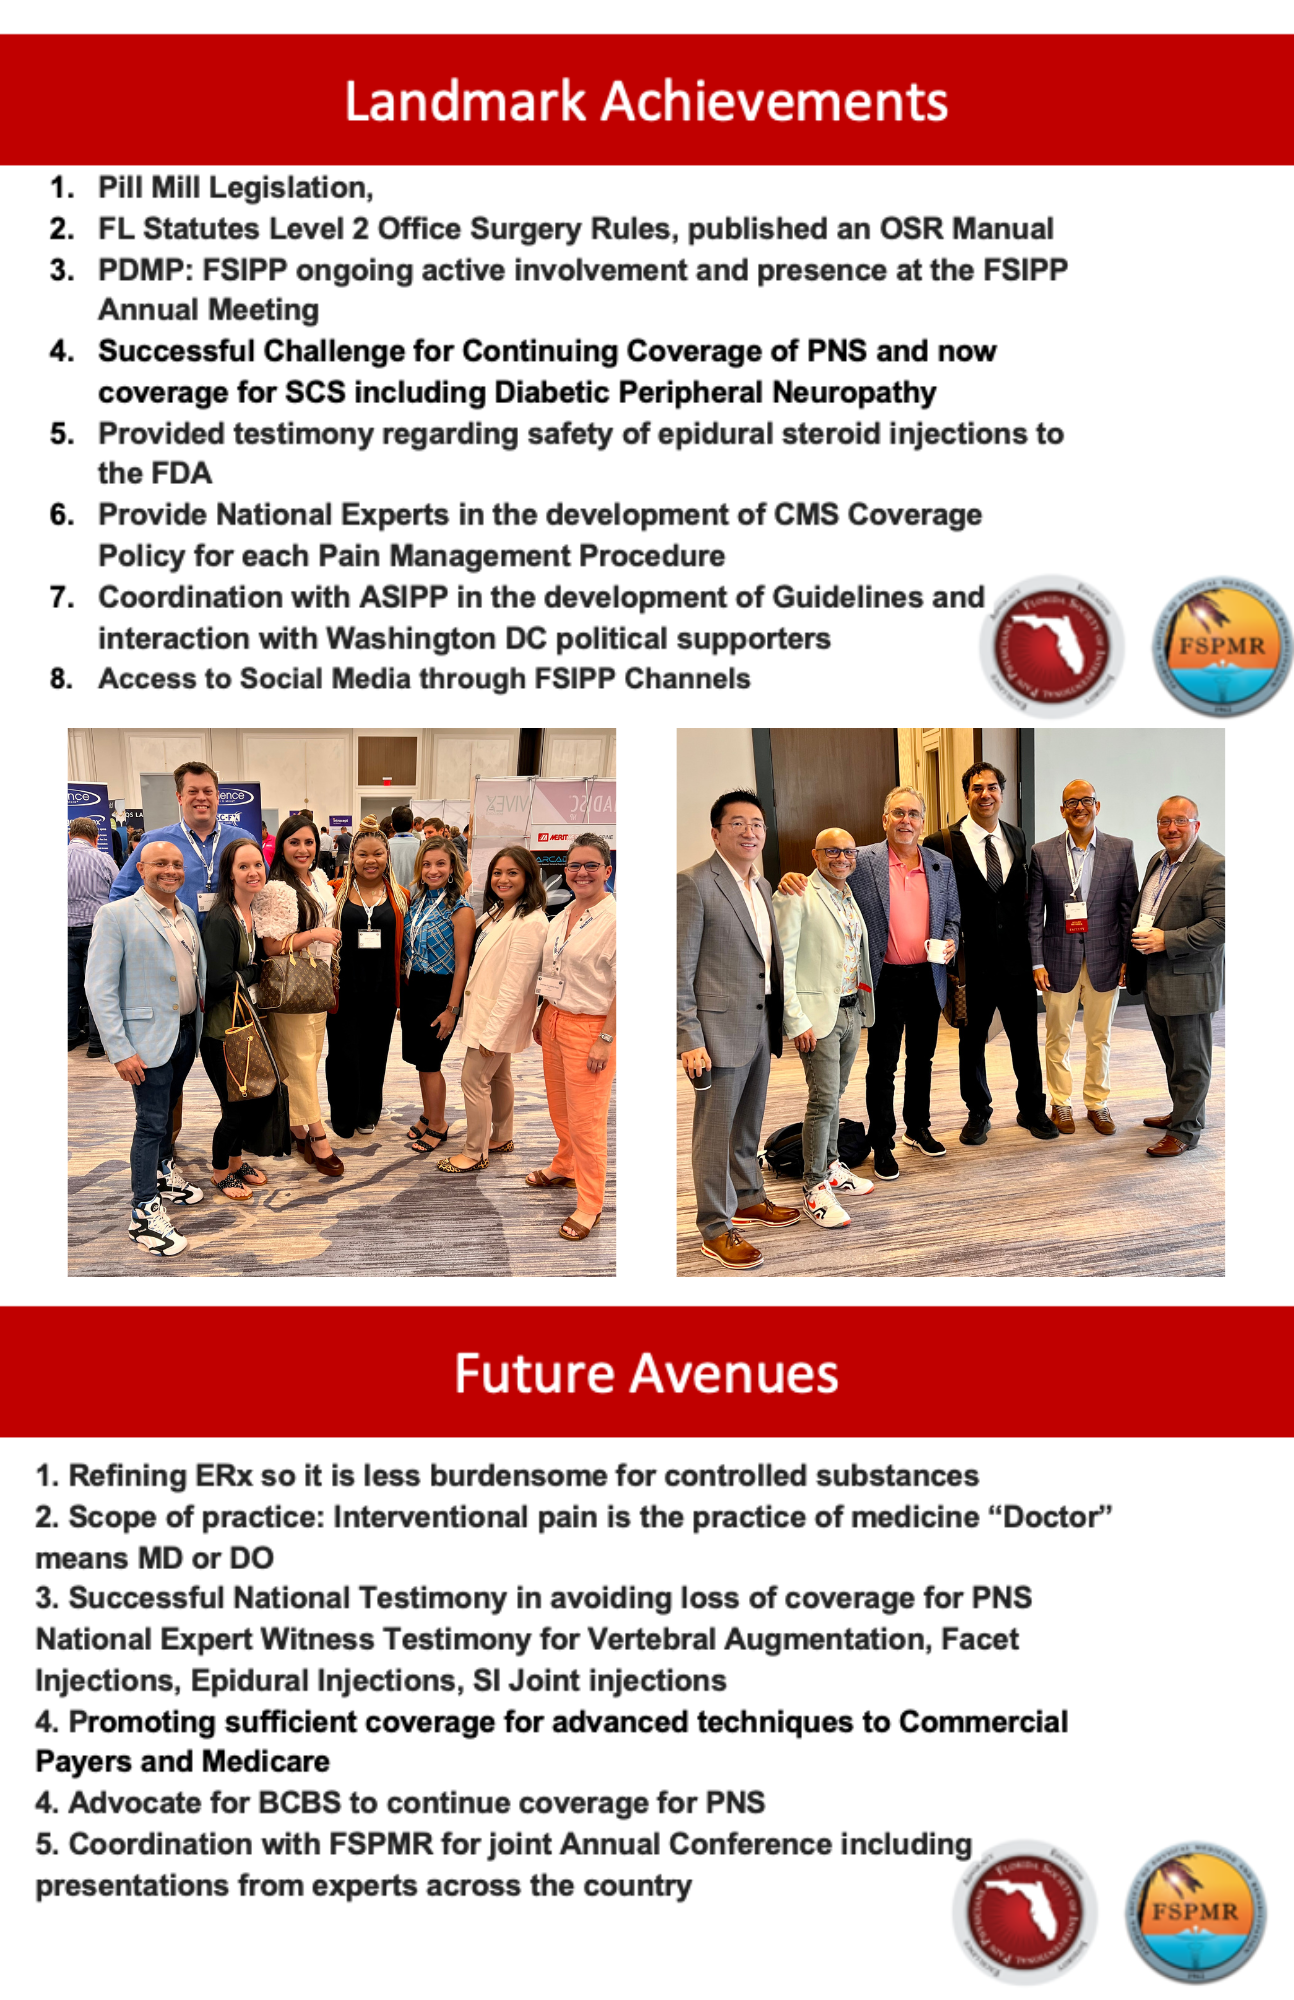 FSIPP Achievement and Futures